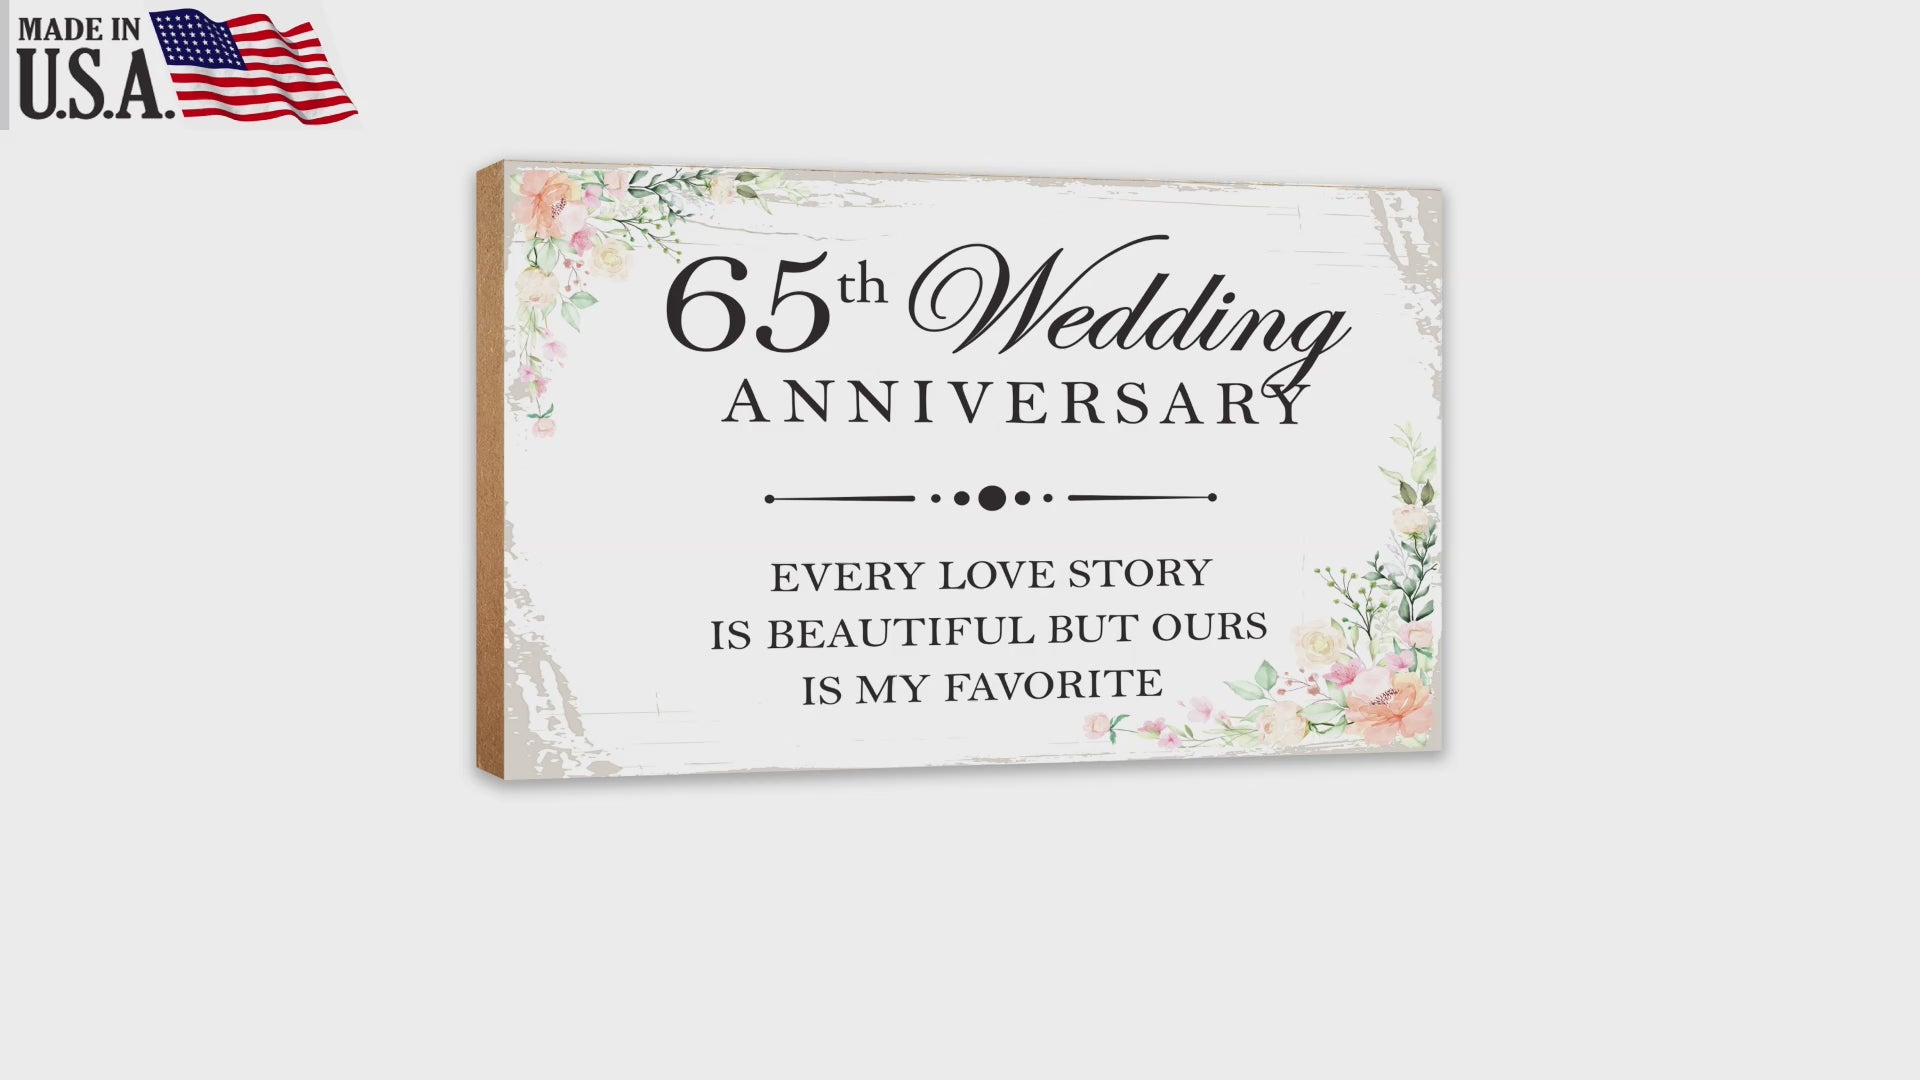 65th Wedding Anniversary Unique Shelf Decor and Tabletop Signs Gift for Couples - Every Love Story